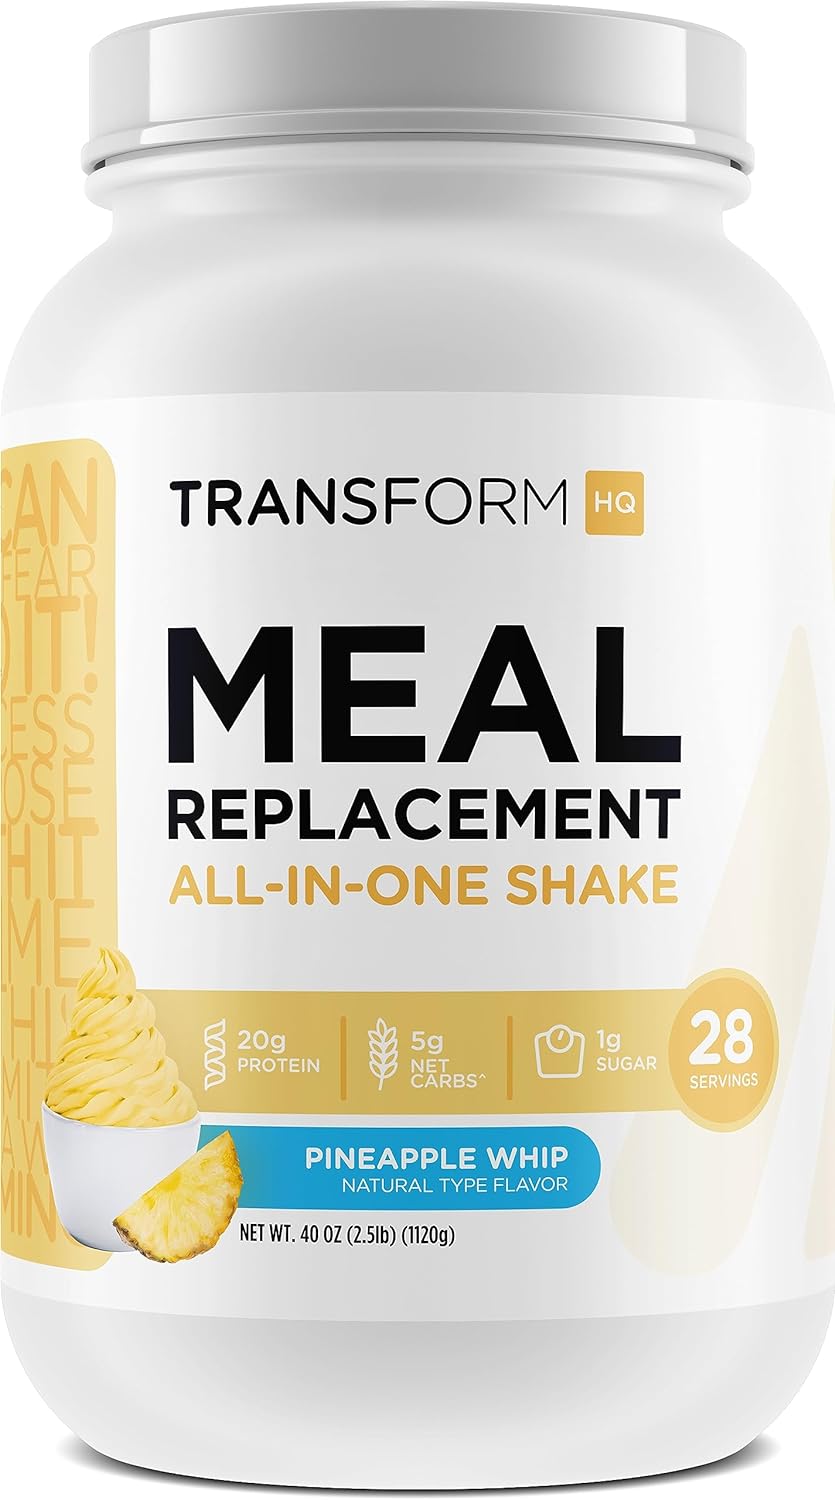 TransformHQ Meal Replacement Shake Powder 28 Servings (Pineapple Whip)0.7 Ounces